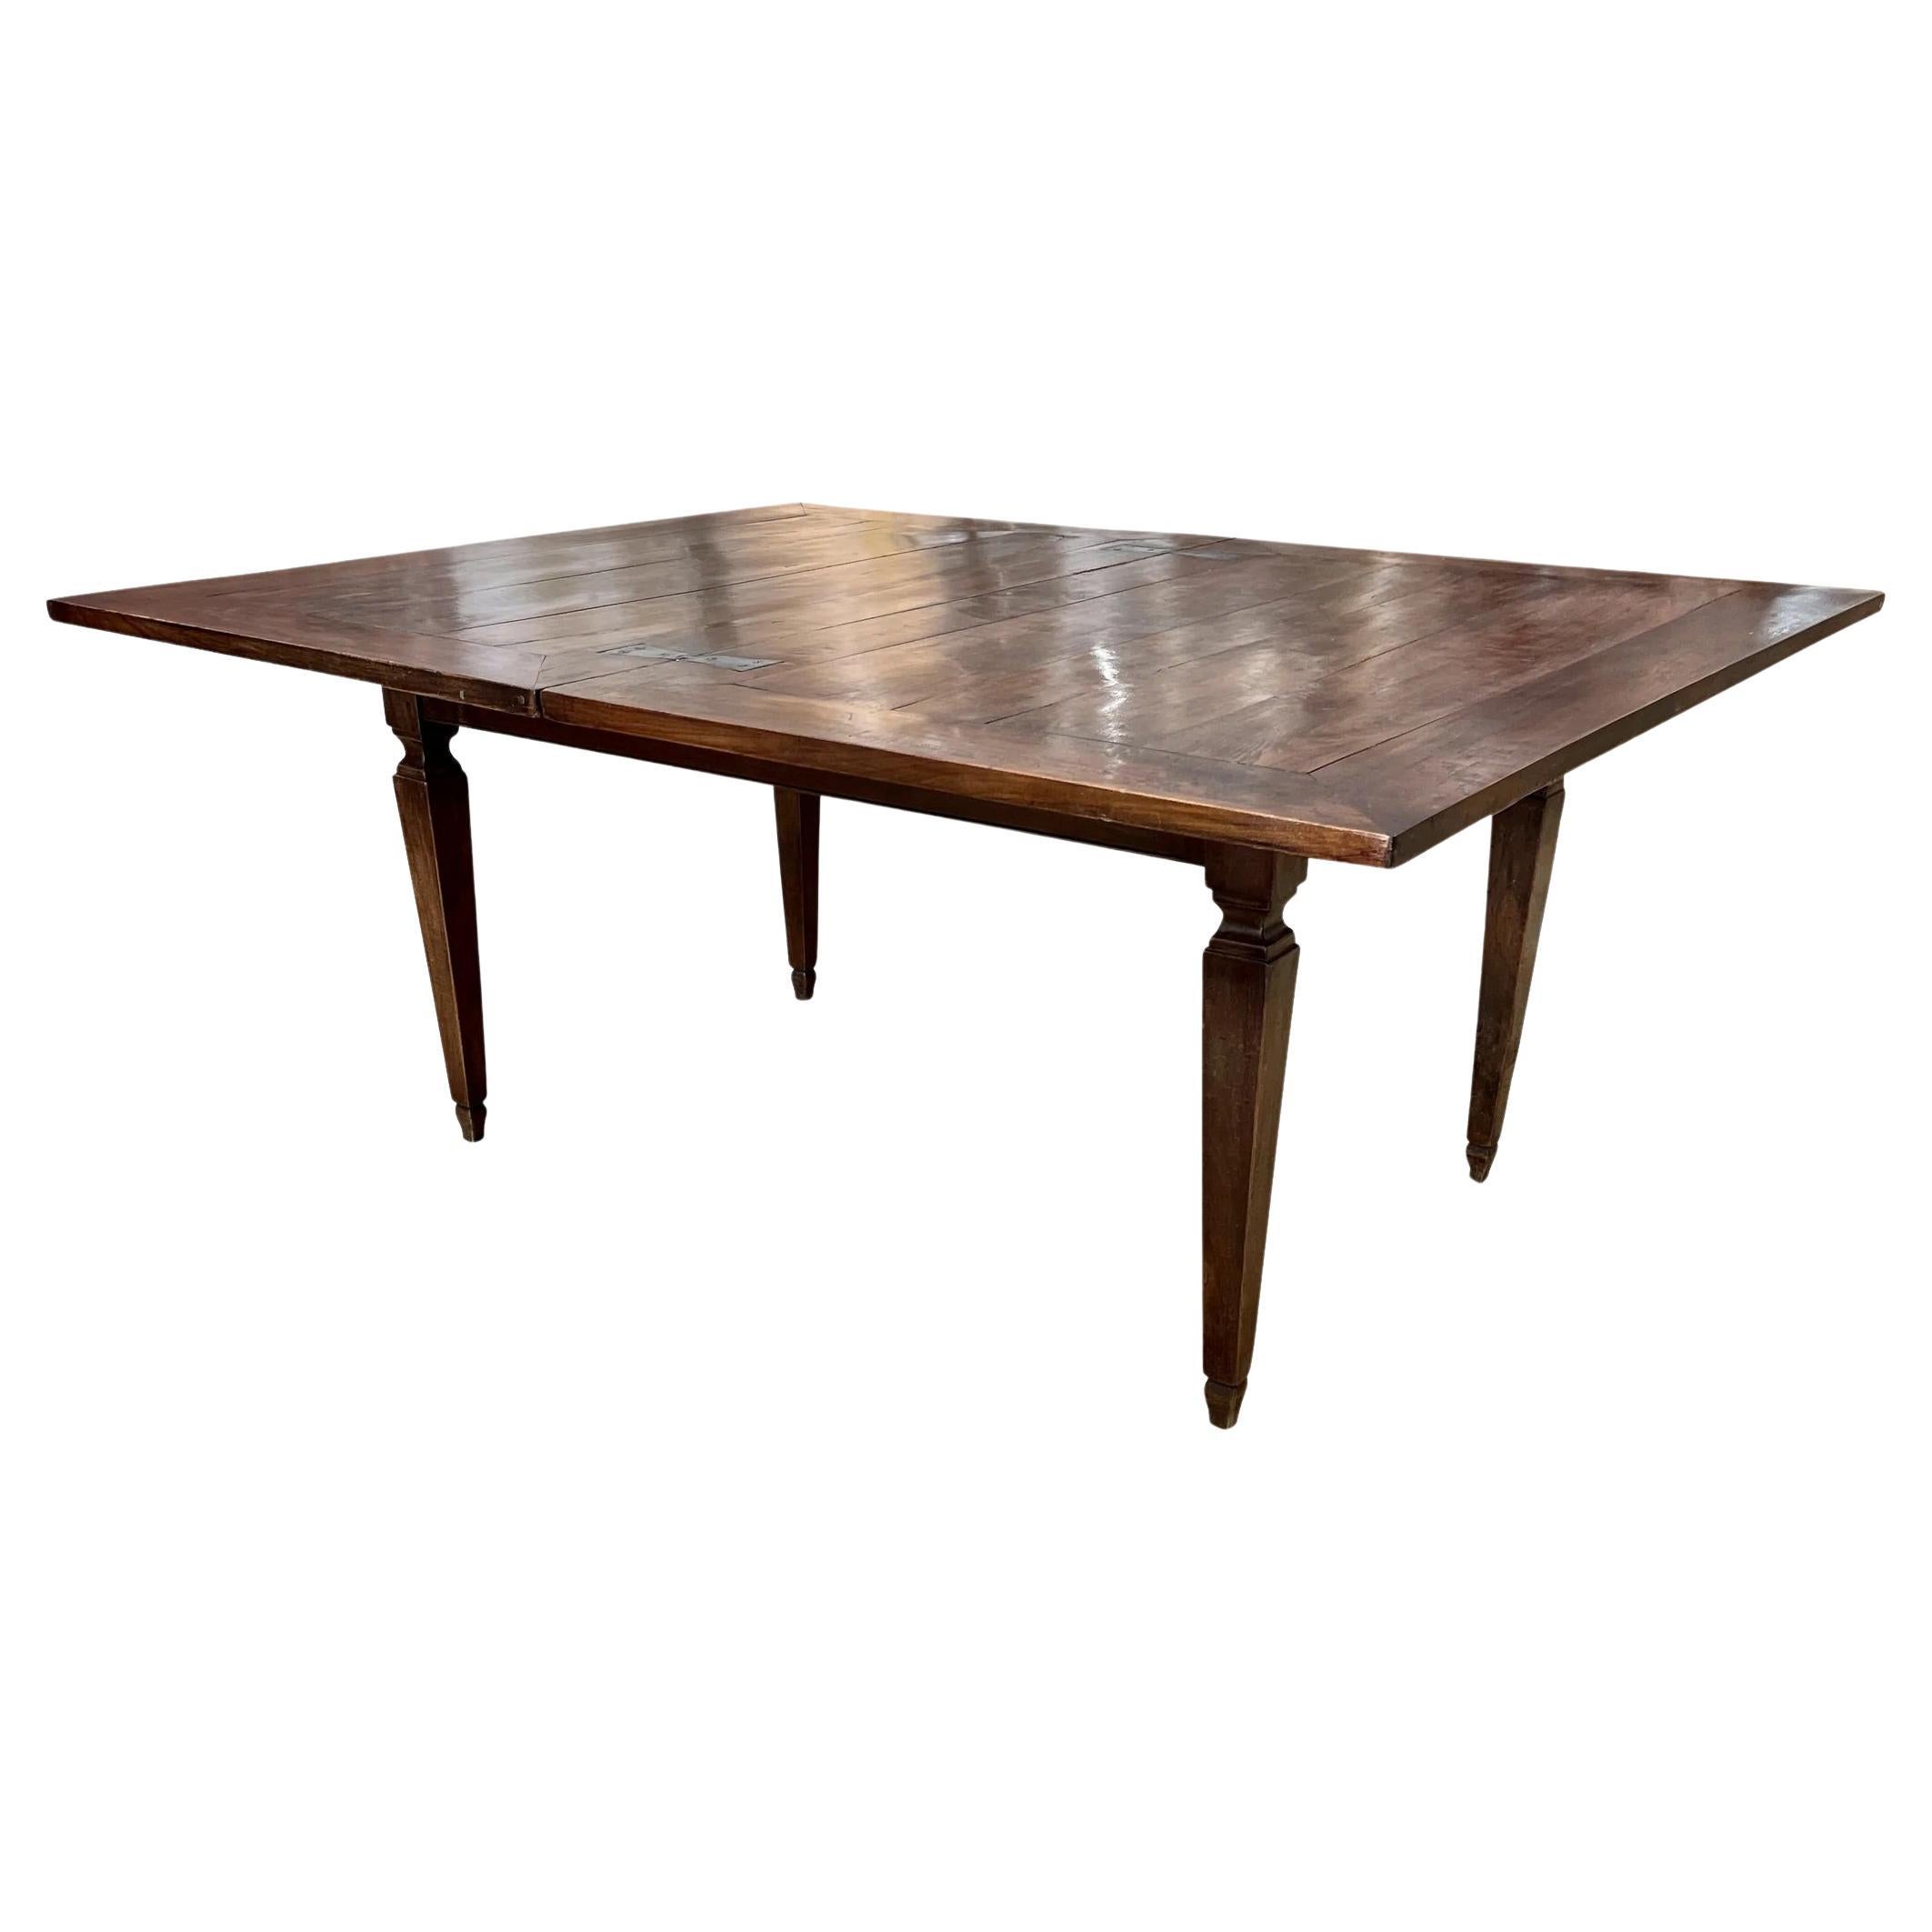 Italian Walnut Rectangular Dining Table, 19th Century, possibly earlier For Sale